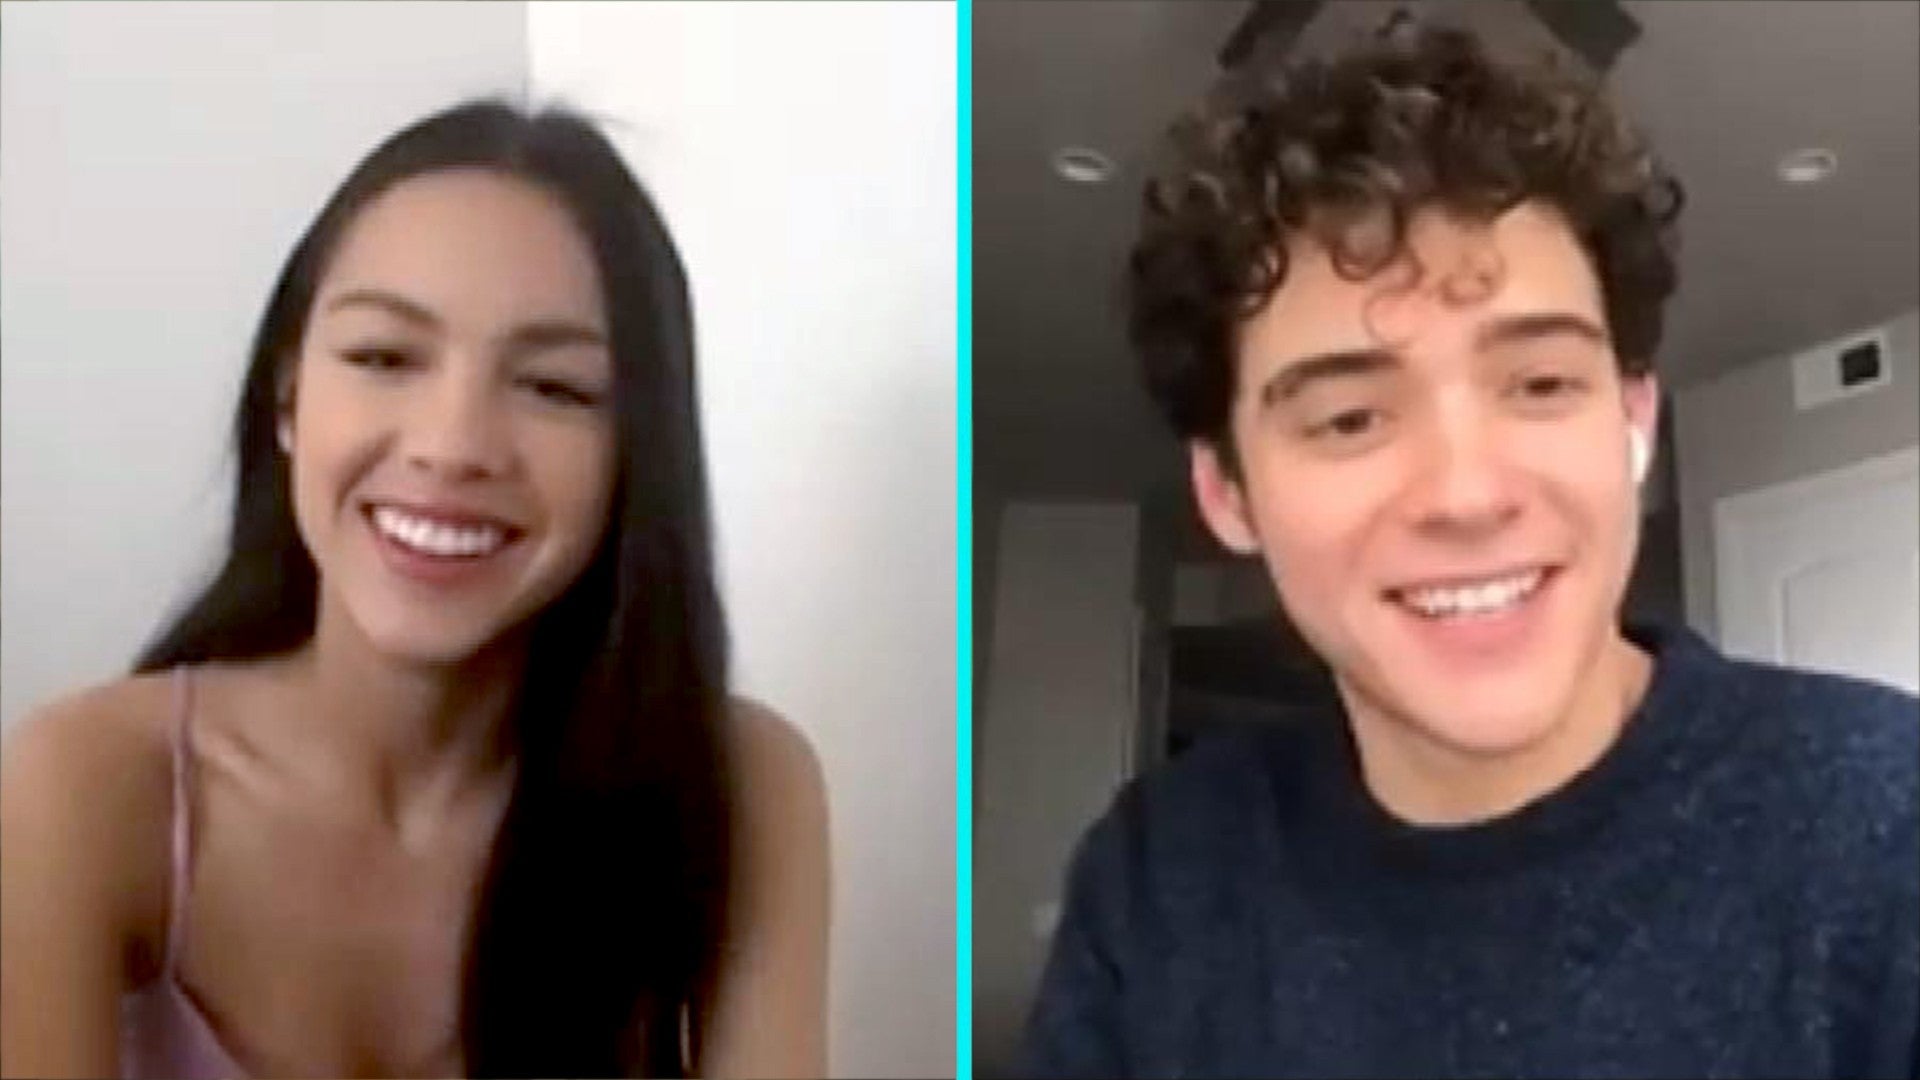 Olivia rodrigo and joshua bassett are two of the hottest young stars in hol...